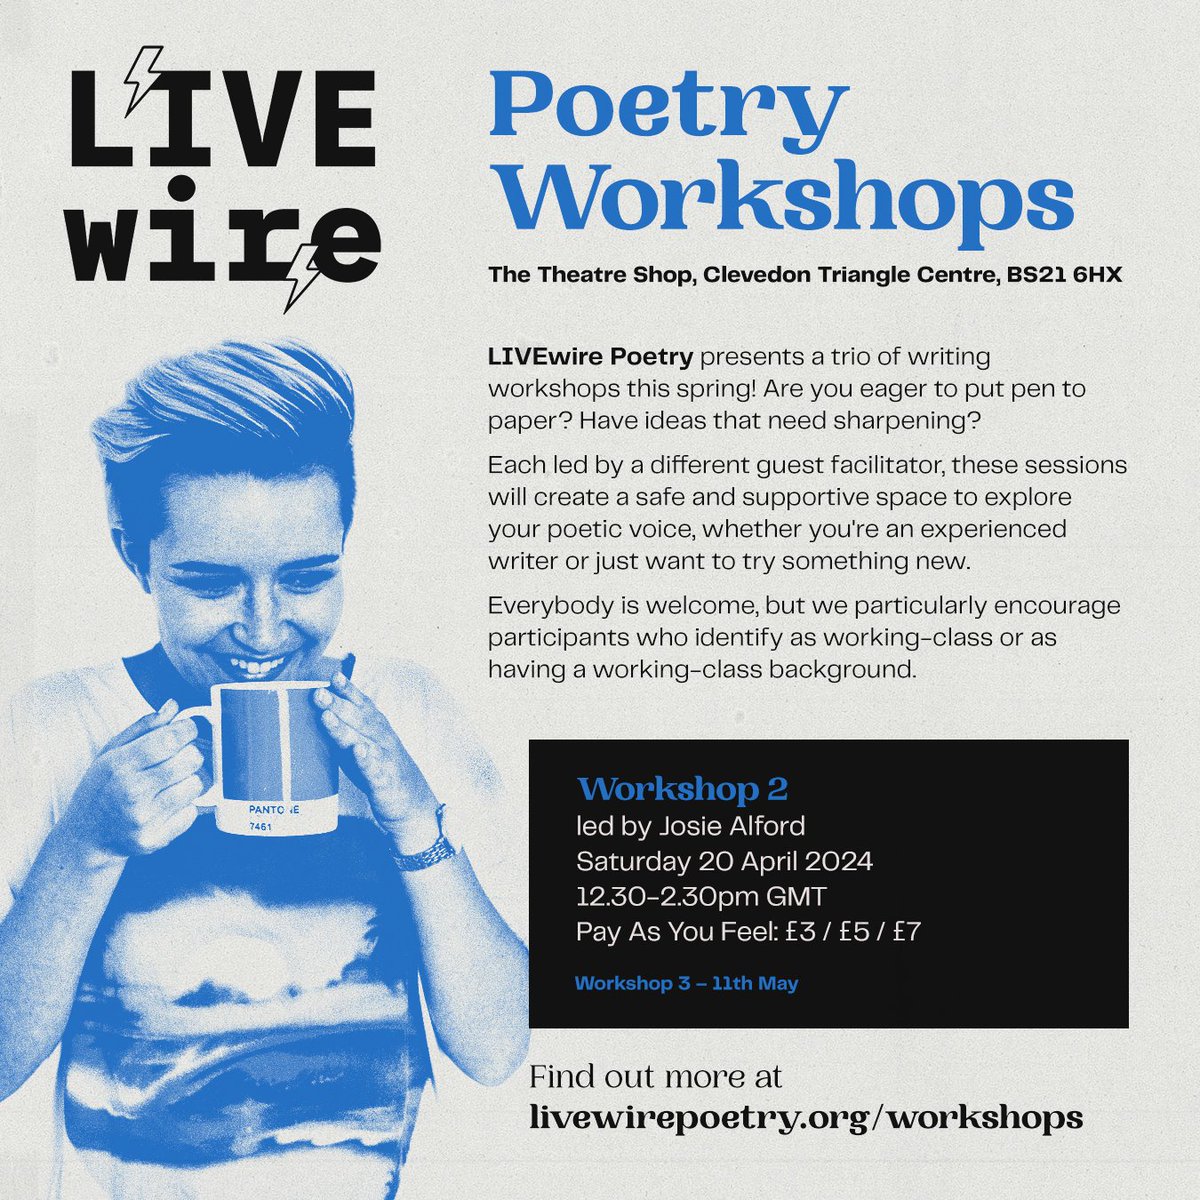 The second of our poetry writing workshops in Clevedon takes place at @TheatreShop1 on Sat 20 Apr! This time, we welcome the fabulous @JosieAlfordPoet as our guest facilitator. The workshop takes place from 1230-1430 and tickets are PAYF (£3, £5, £7) ✍️ eventbrite.co.uk/e/poetry-writi…